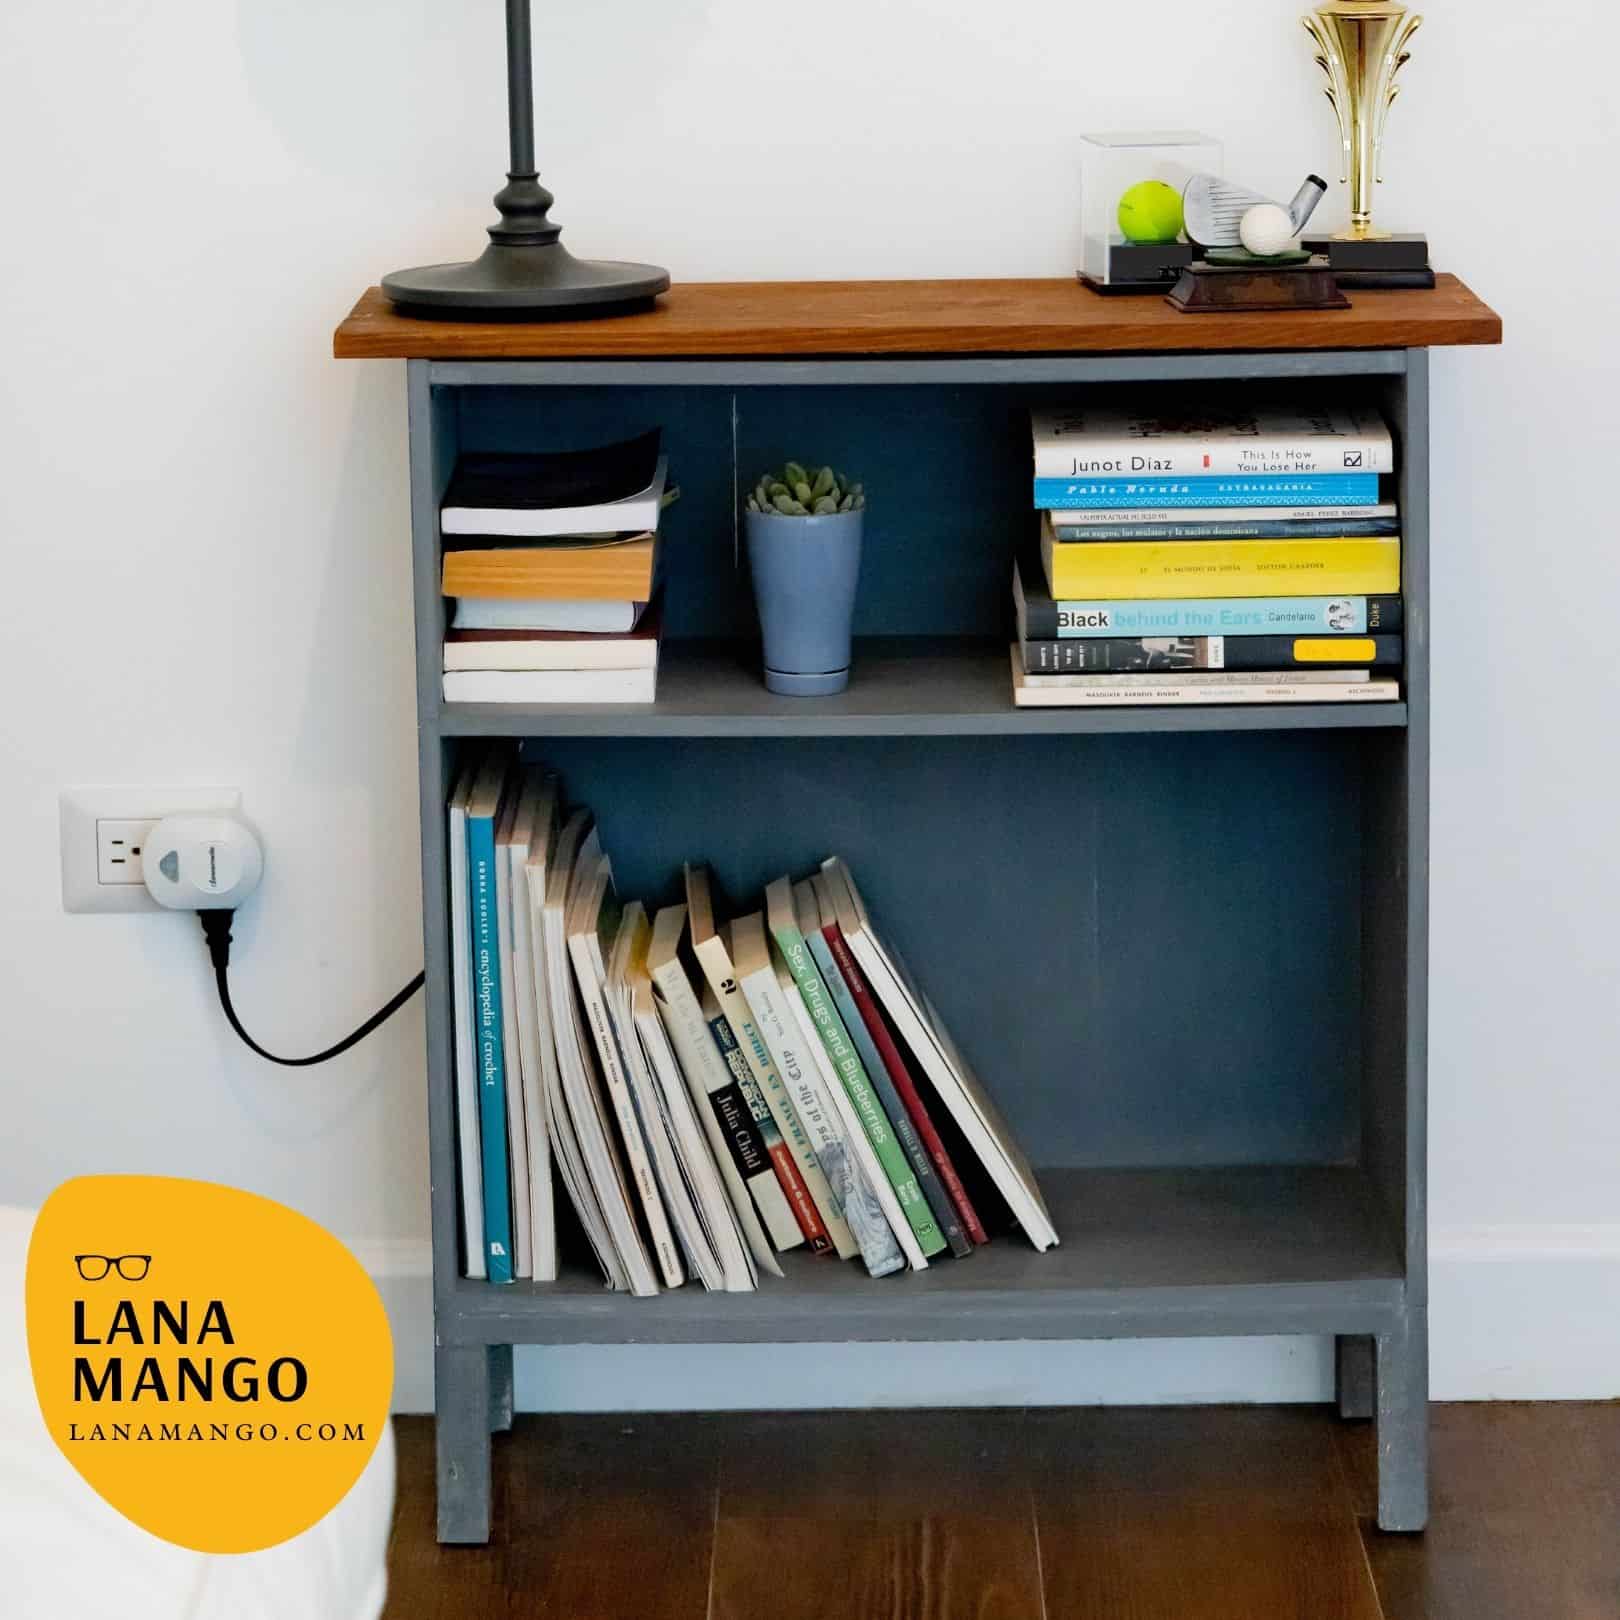 How to refurbish a cheap bookcase: great ideas for a cheap bookshelf makeover